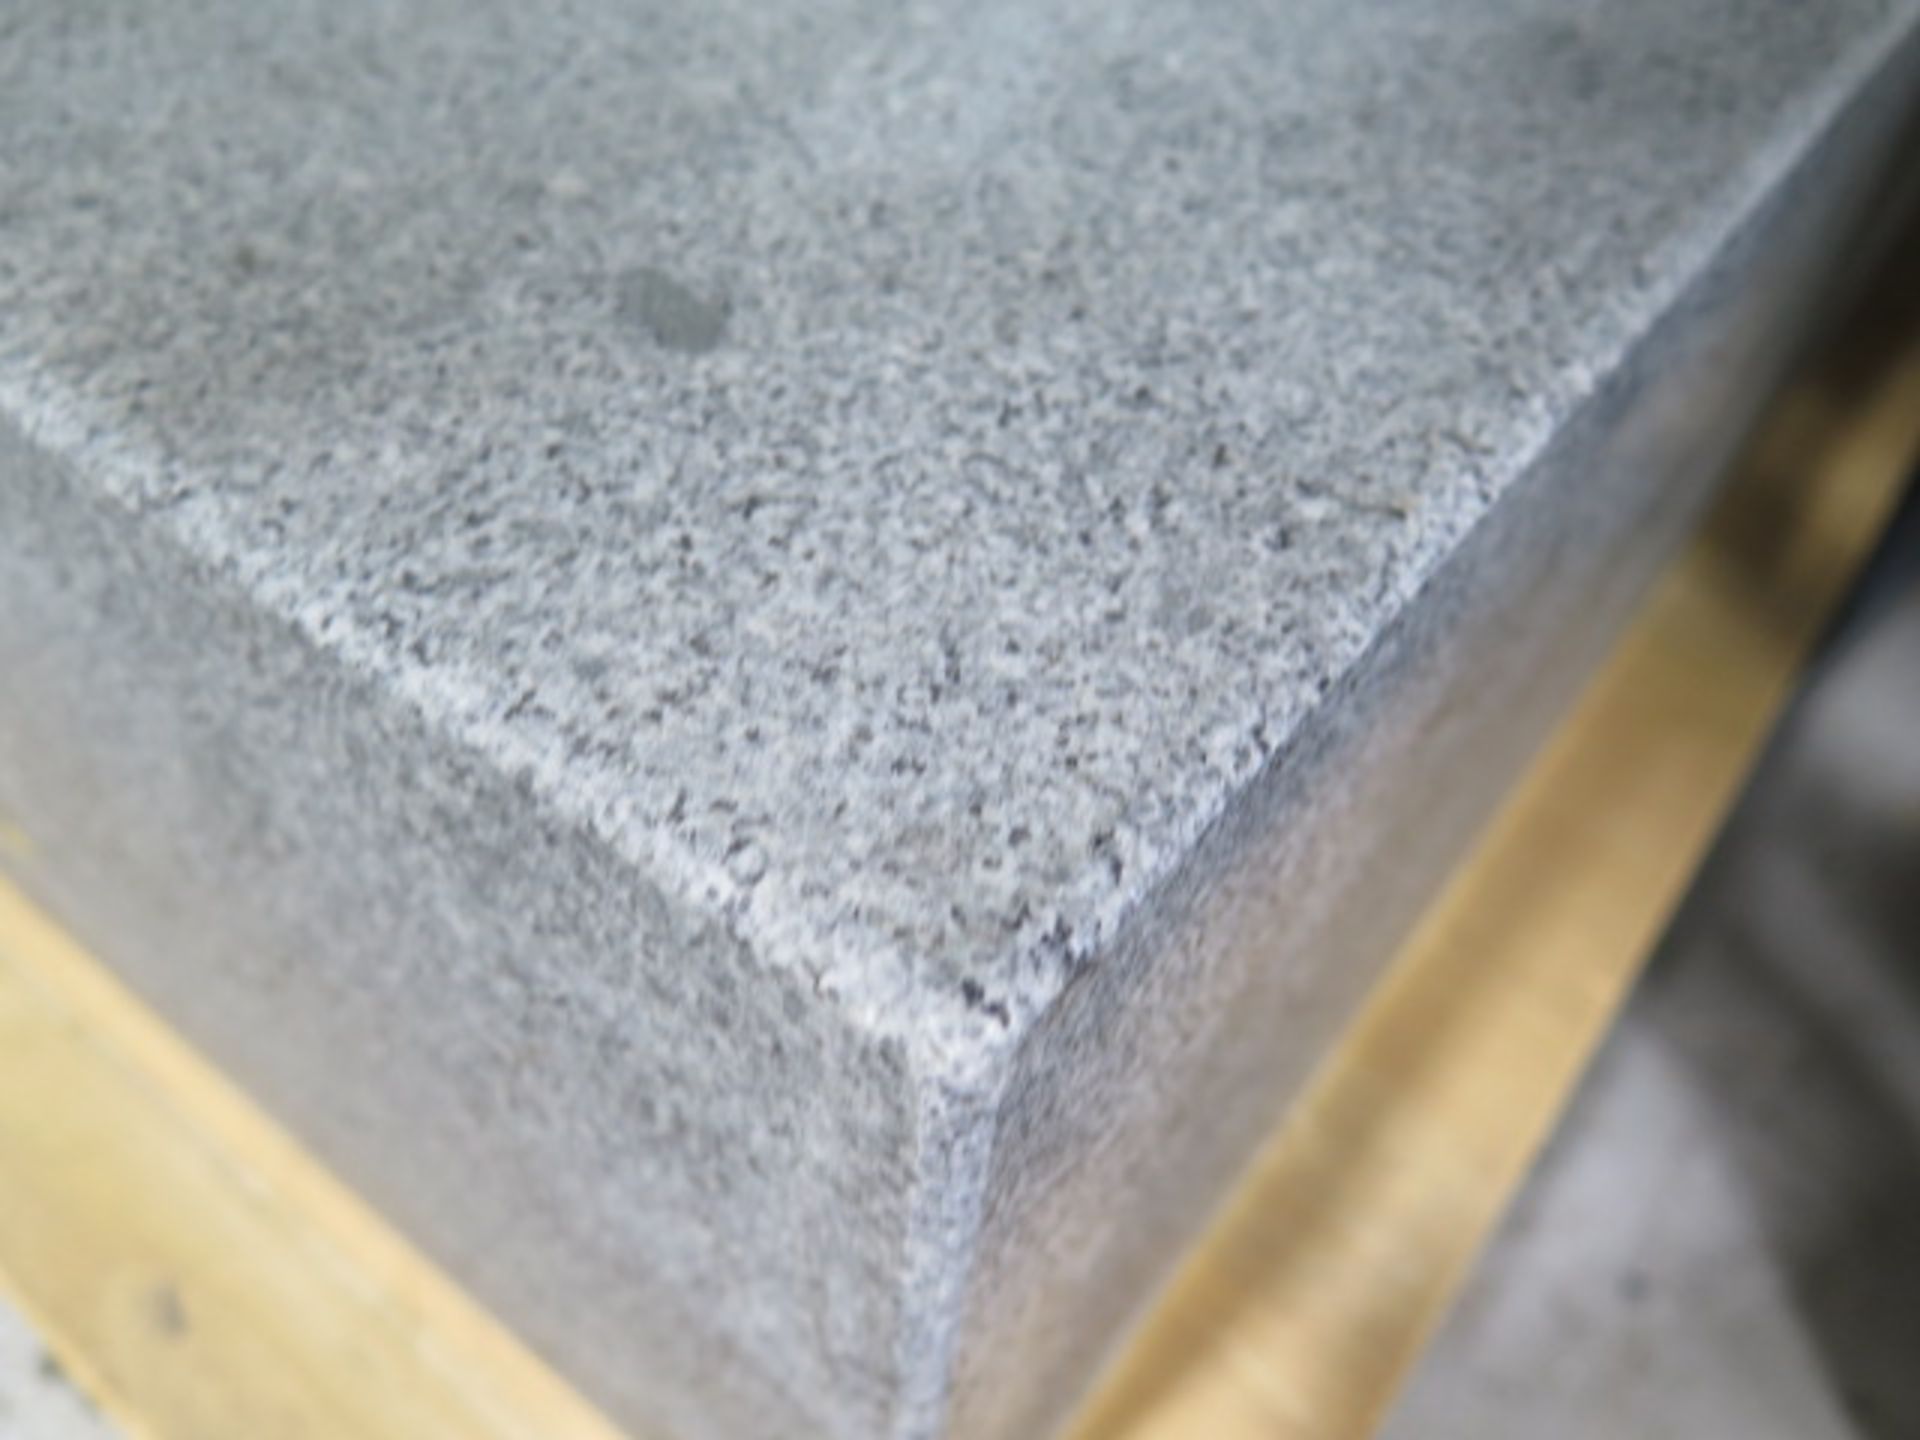 36” x 48” x 6” Granite Surface Plate (Second Location) (SOLD AS-IS - NO WARRANTY) - Image 5 of 5